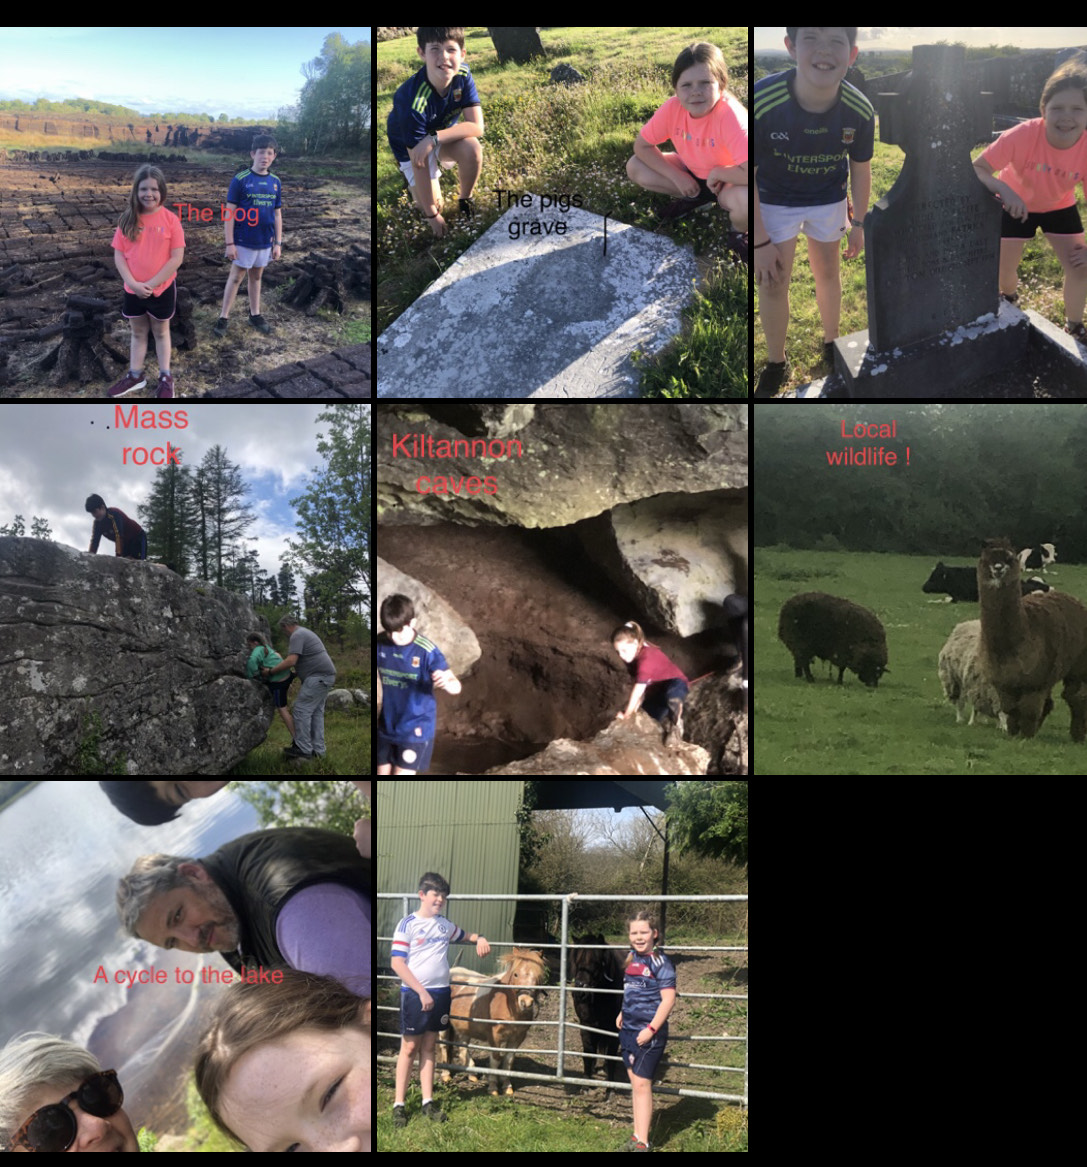 Ali and Louis were busy last week discovering different historical, geographical and other sites around Tulla. They had great fun exploring within their 5km radius. Have a look at the amazing places and things they located. @GreenSchoolsIre